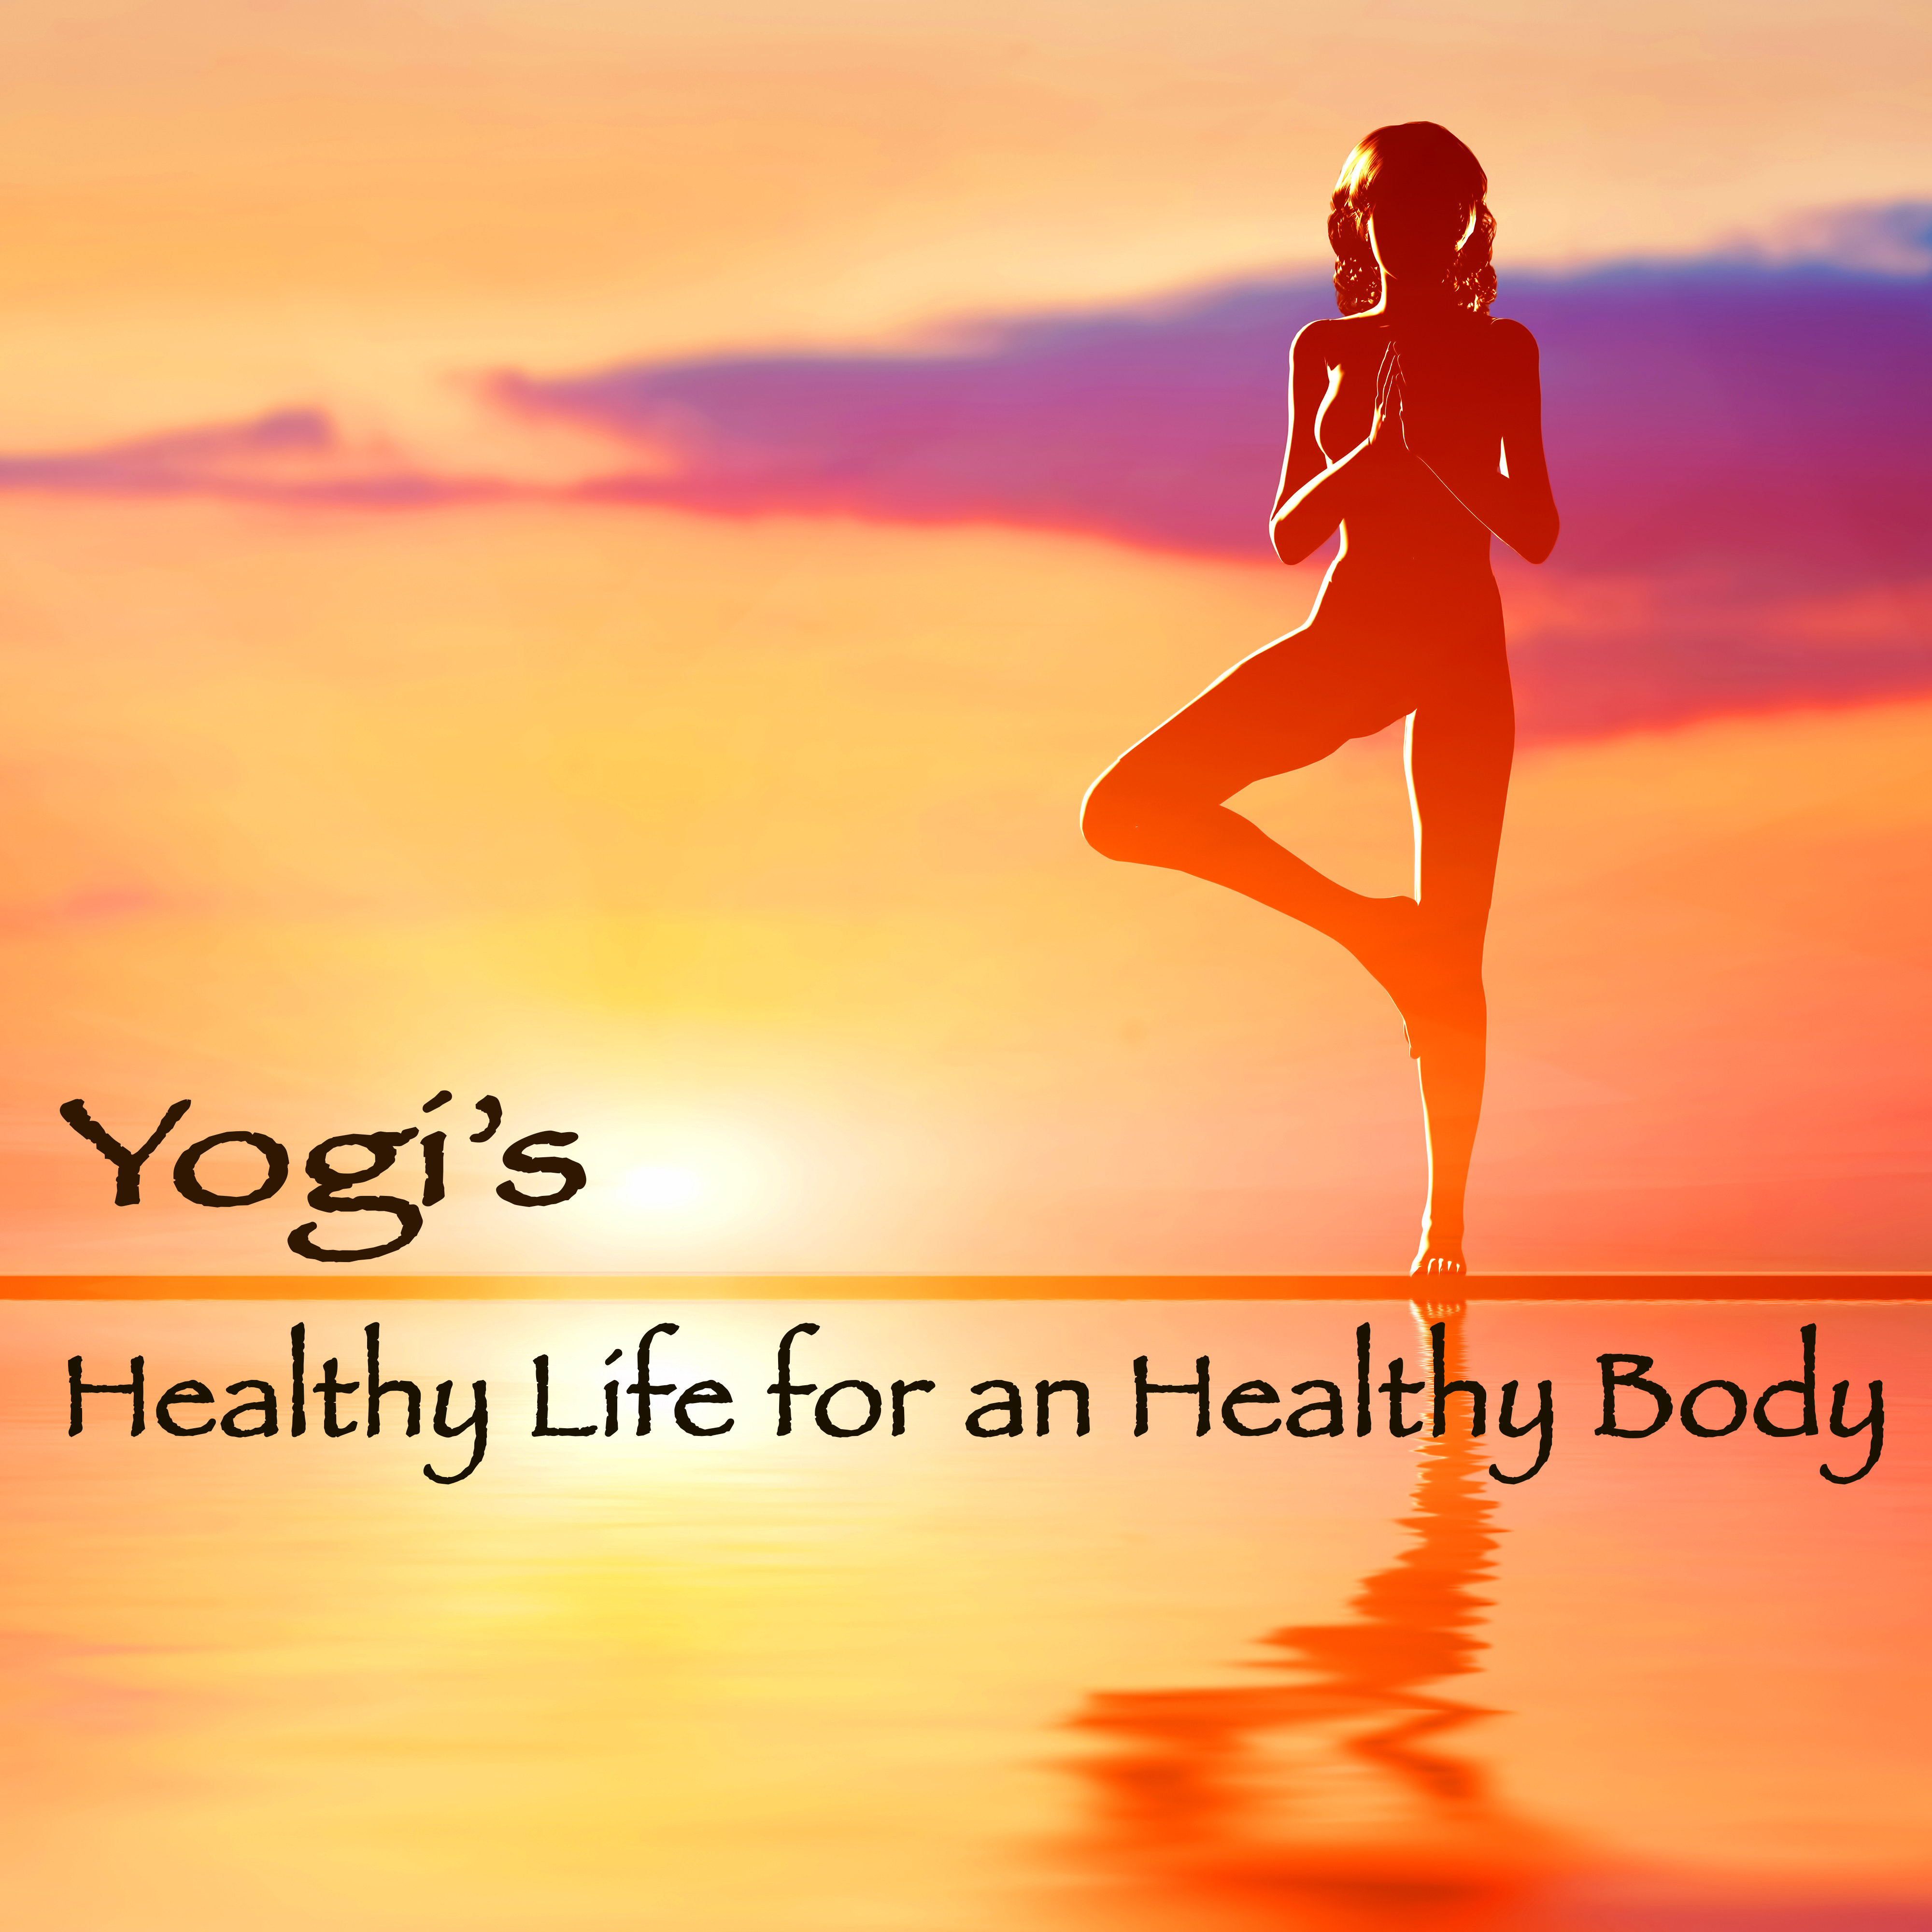 Yogi' s Healthy Life for an Healthy Body  New Age Chillout Music for Asanas  Meditation in Yoga Space